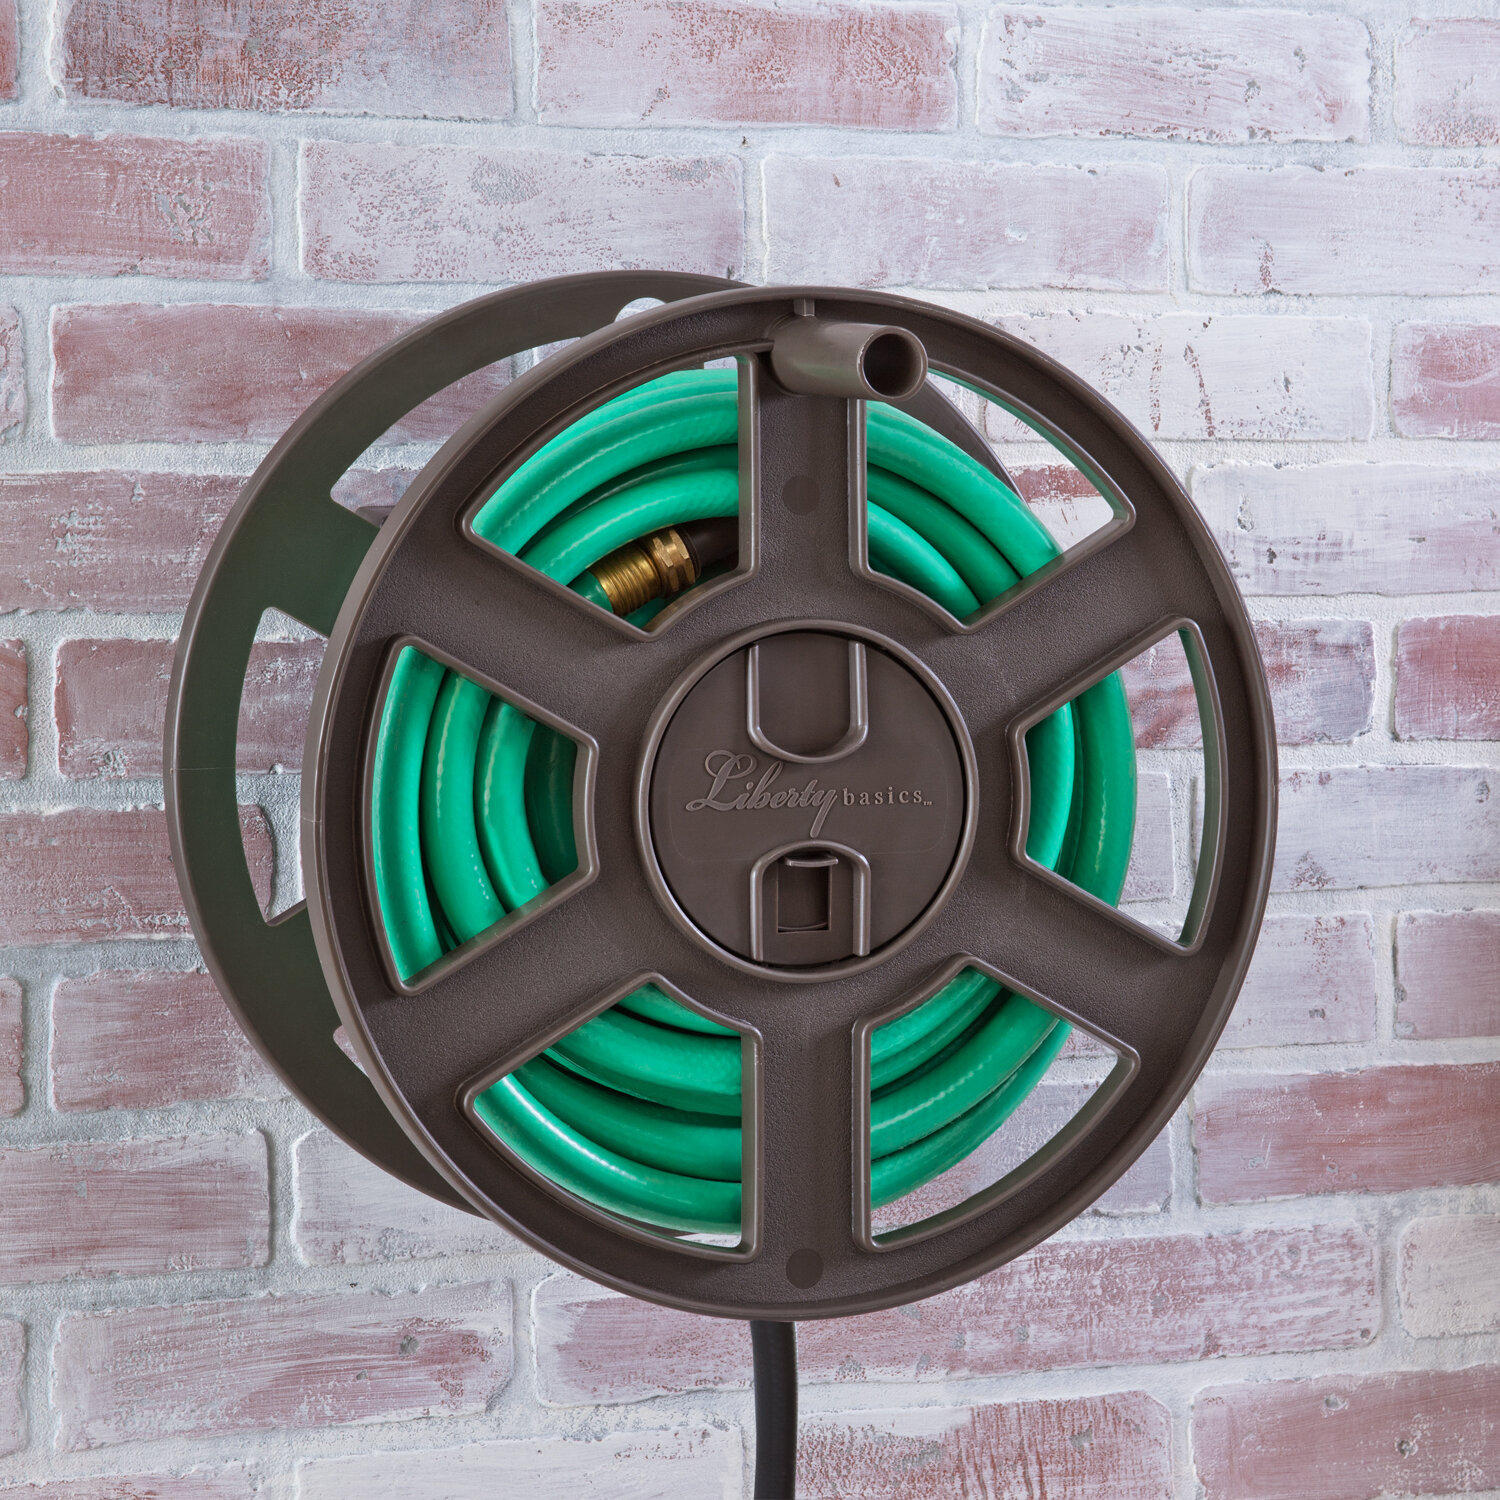 LIBERTY WALL MOUNT HOSE REEL,STEEL,15-1/2 I - Hand Crank Garden Hose Reels  without Hose - GGF2PAY8